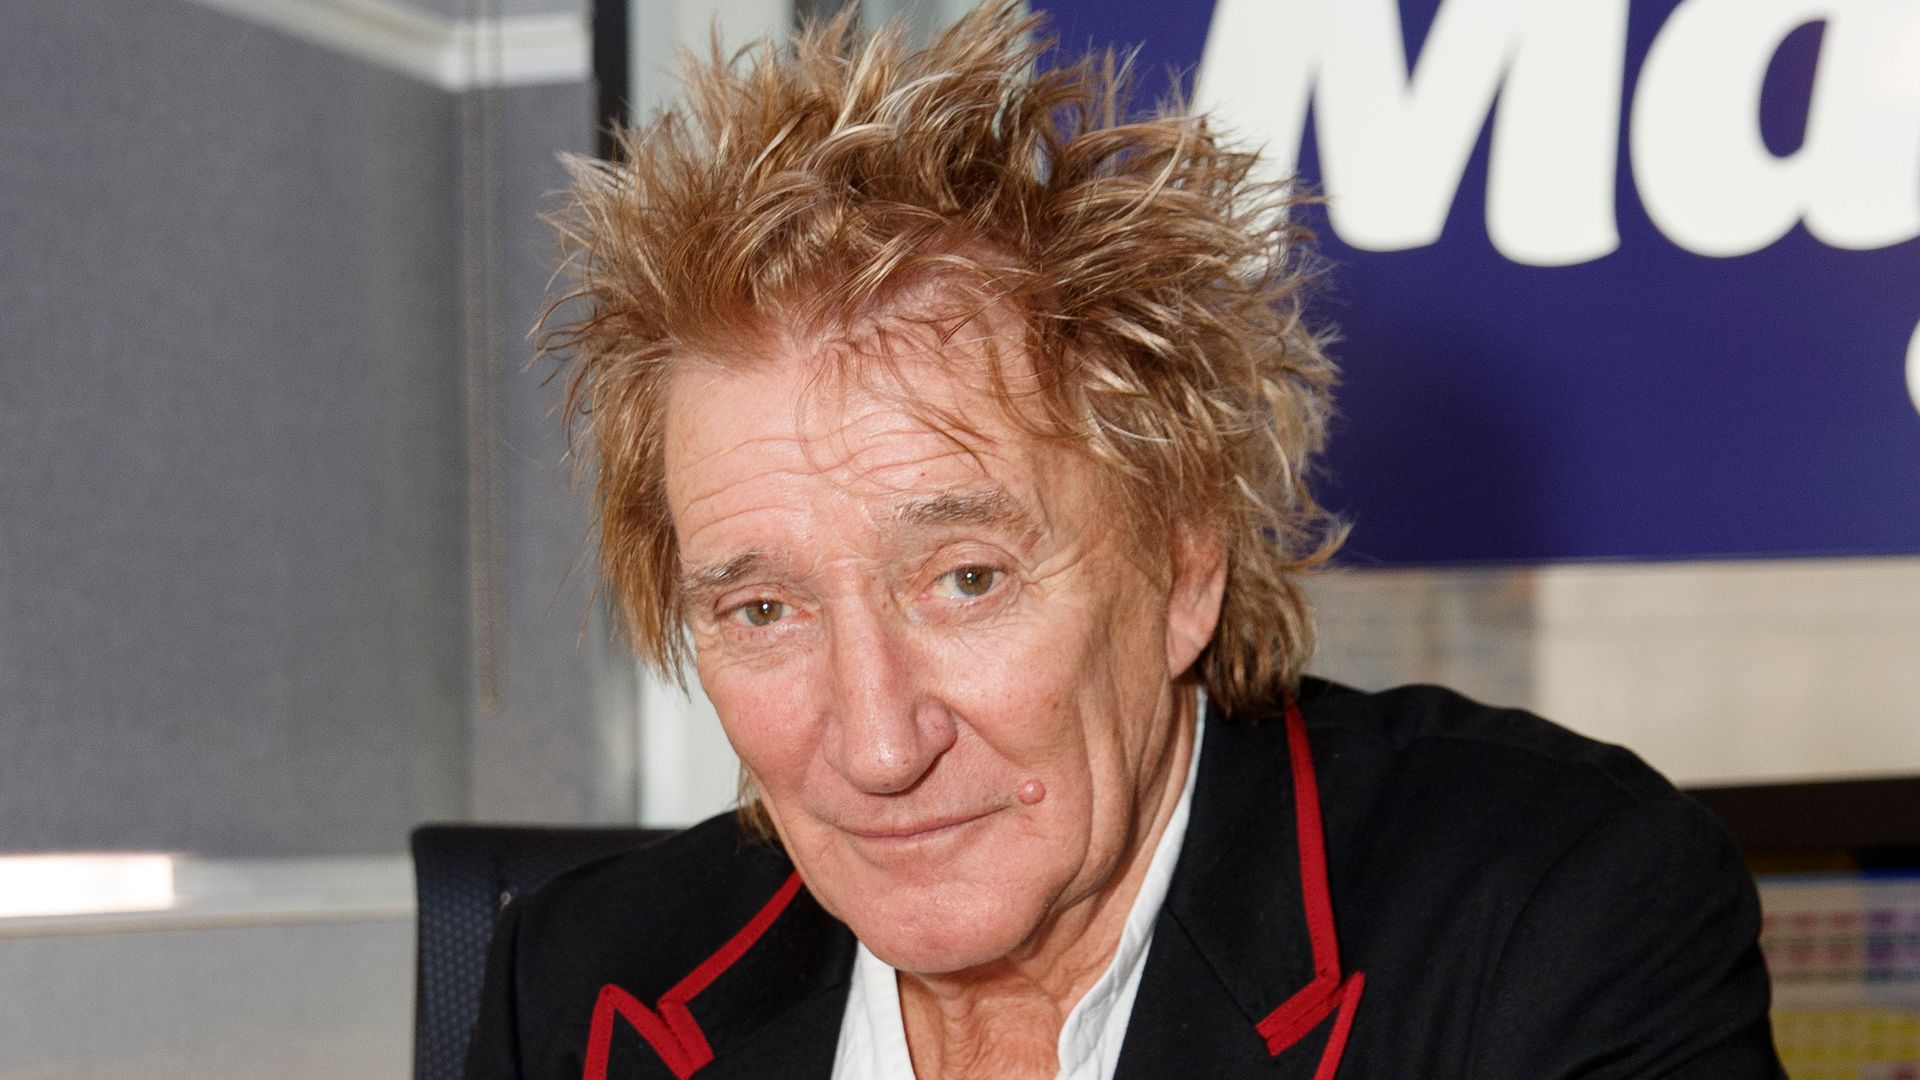 Rod Stewart in black outfit